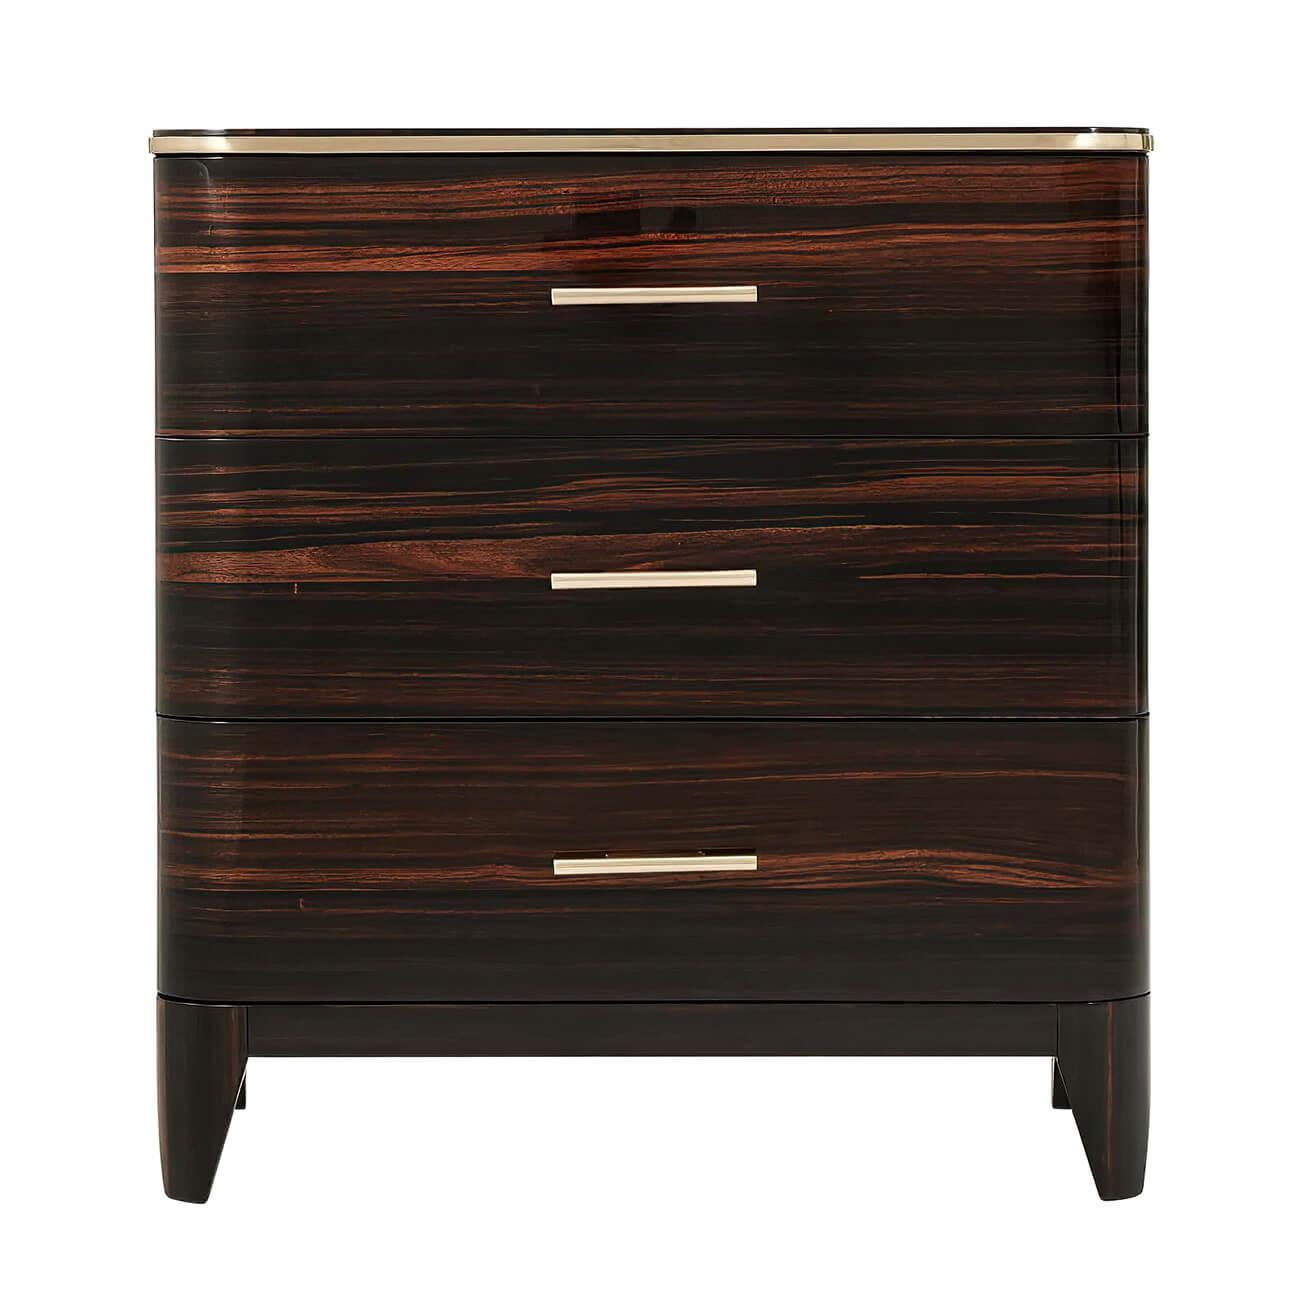 An Art Deco style nightstand inspired by 1930s luxury. This three-drawer chest with a rounded edge top with polished nickel trim, exotic Amara veneers with polished nickel finish handles, on tapering legs, with soft closing drawers.

Dimensions: